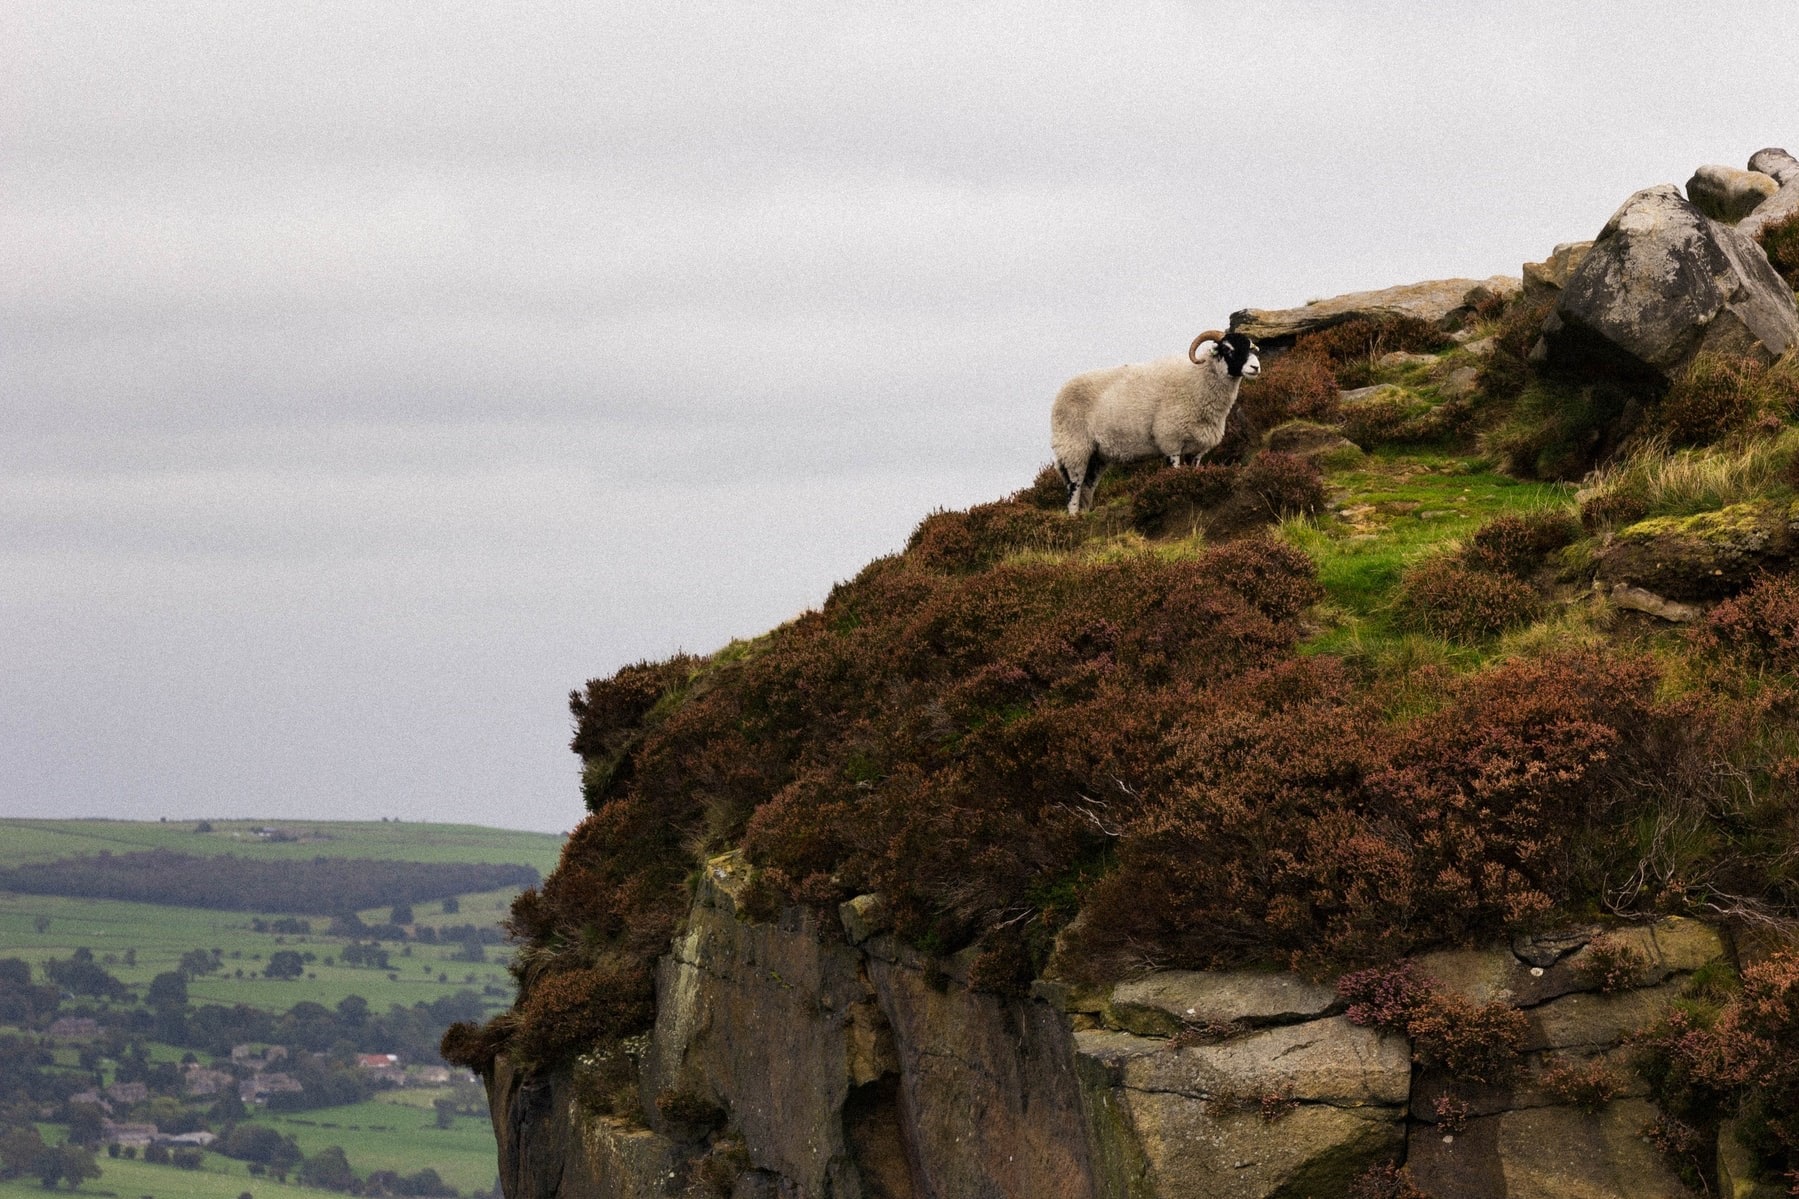 ewe-standing-on-cliff-edge-with-countryside-views-across-ilkley